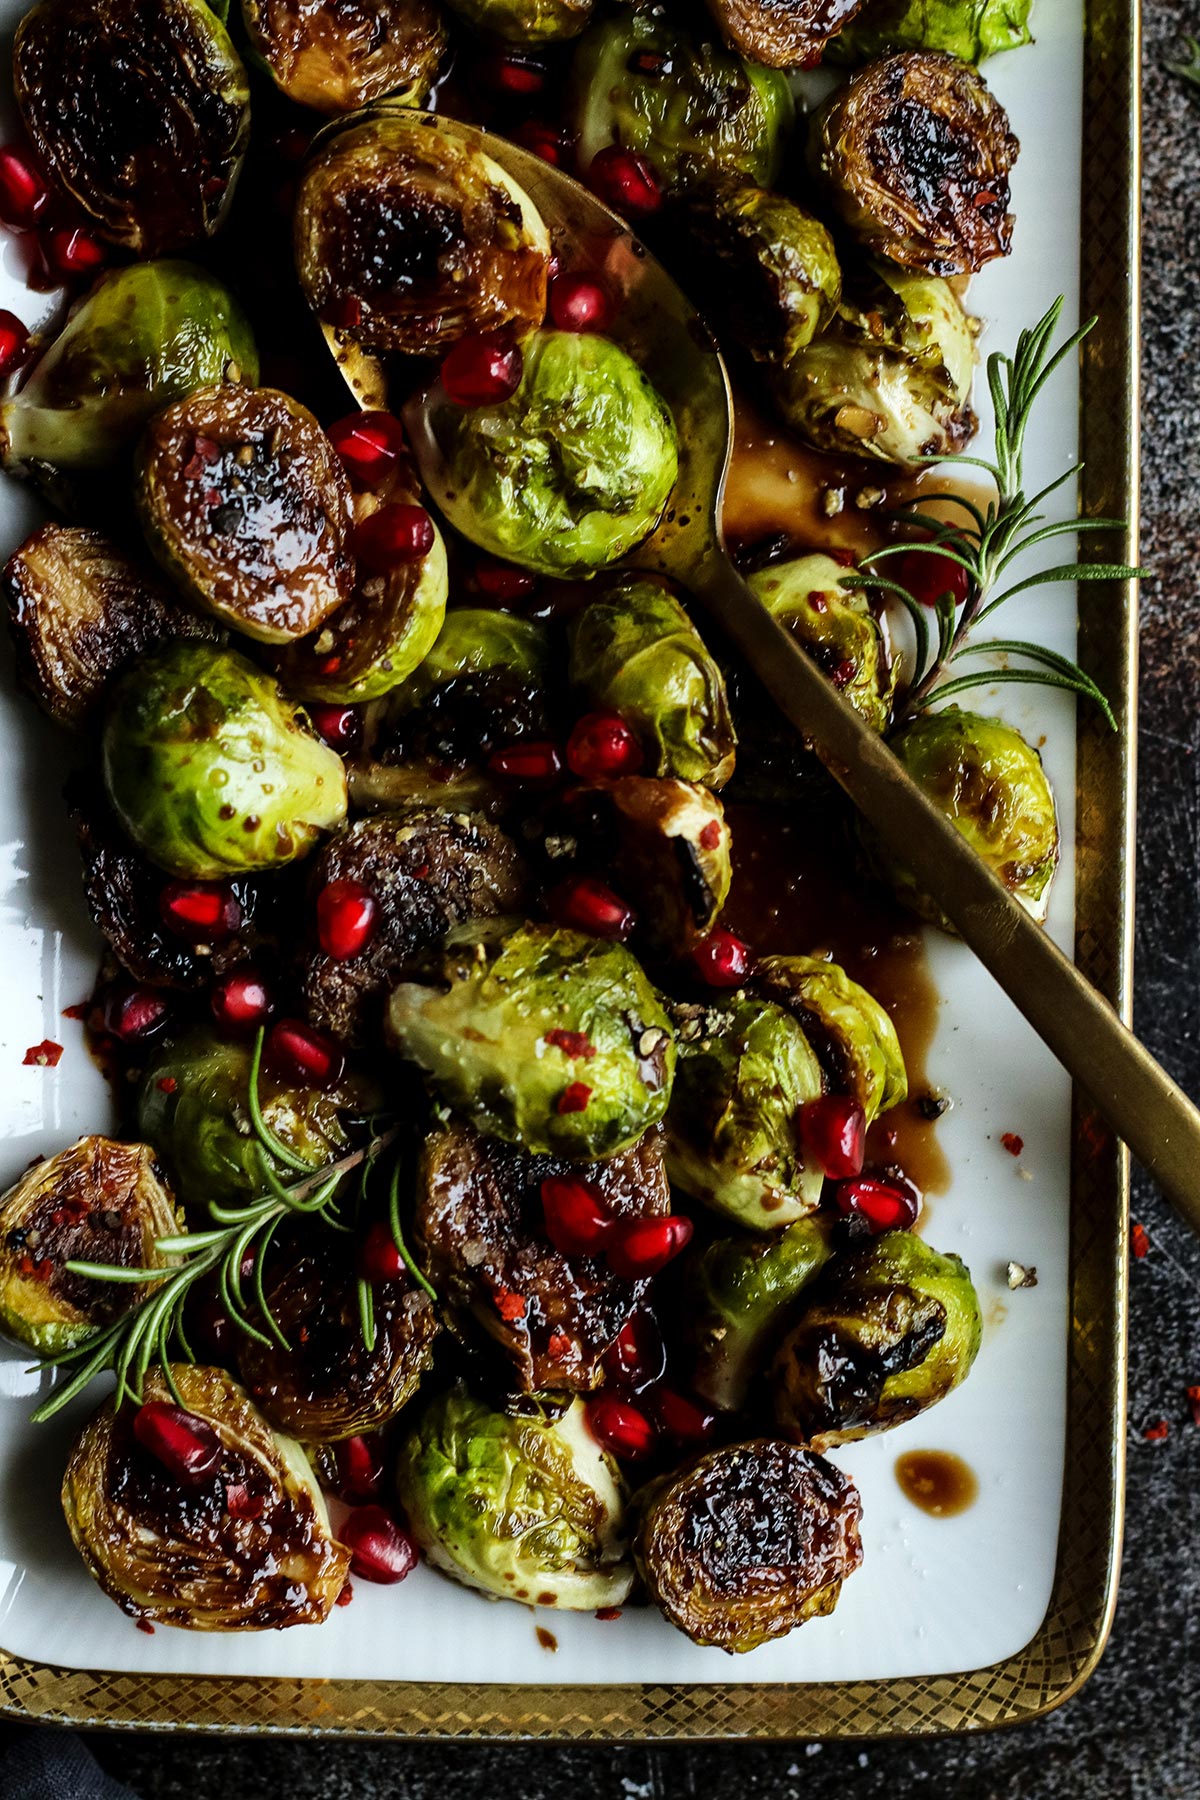 roasted brussels sprouts sprinkled with pomegranate seeds.